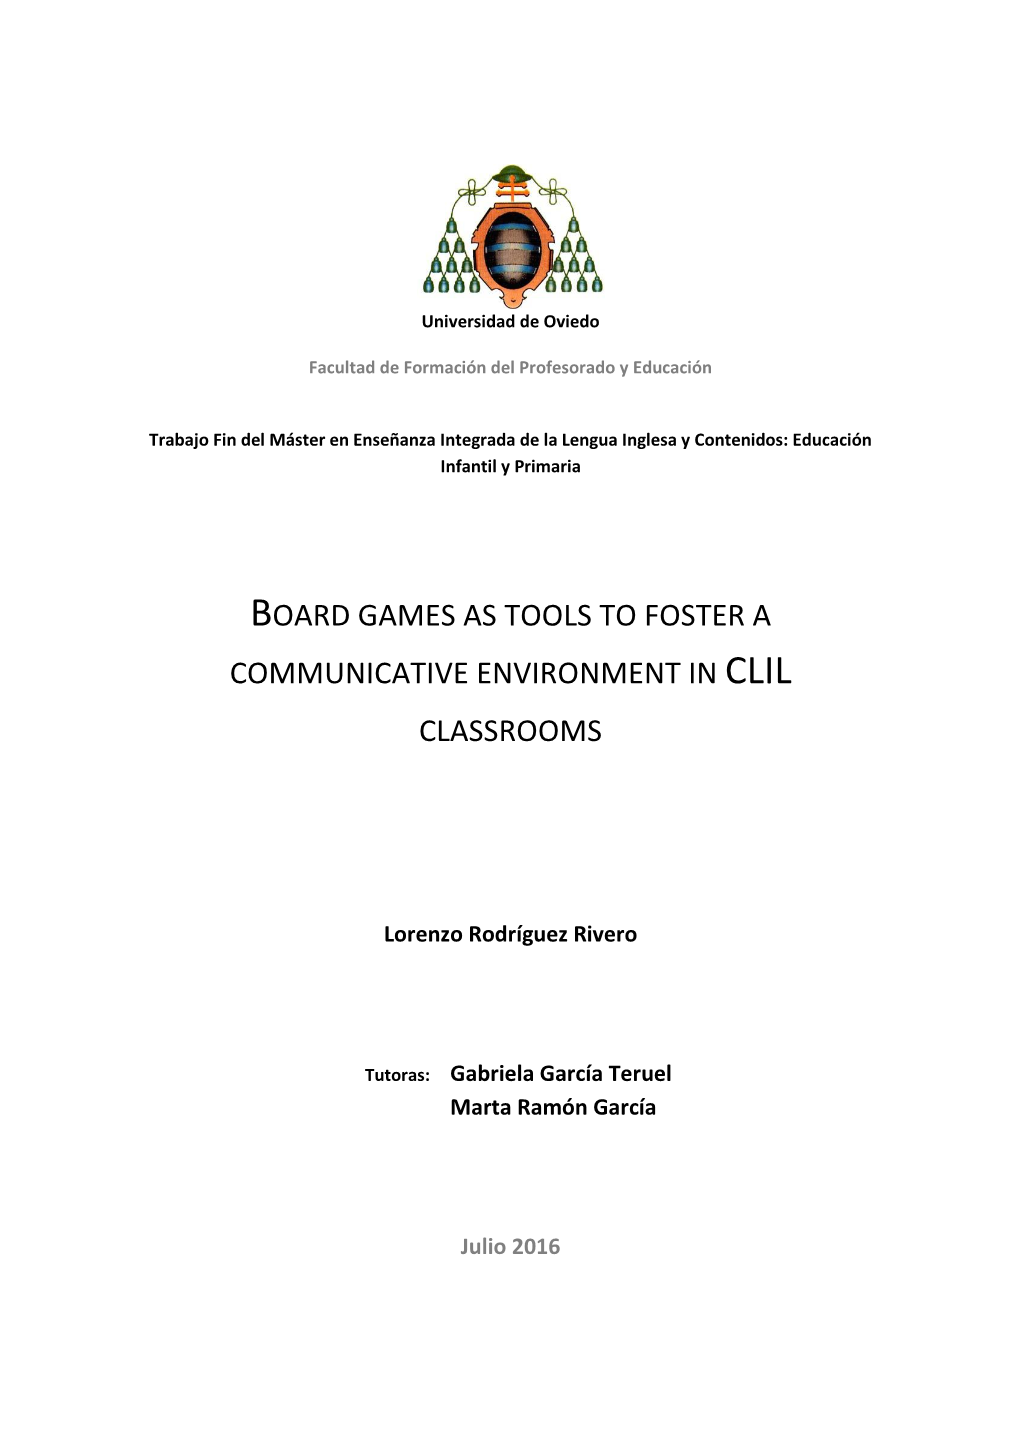 Board Games As Tools to Foster a Communicative Environment in Clil Classrooms